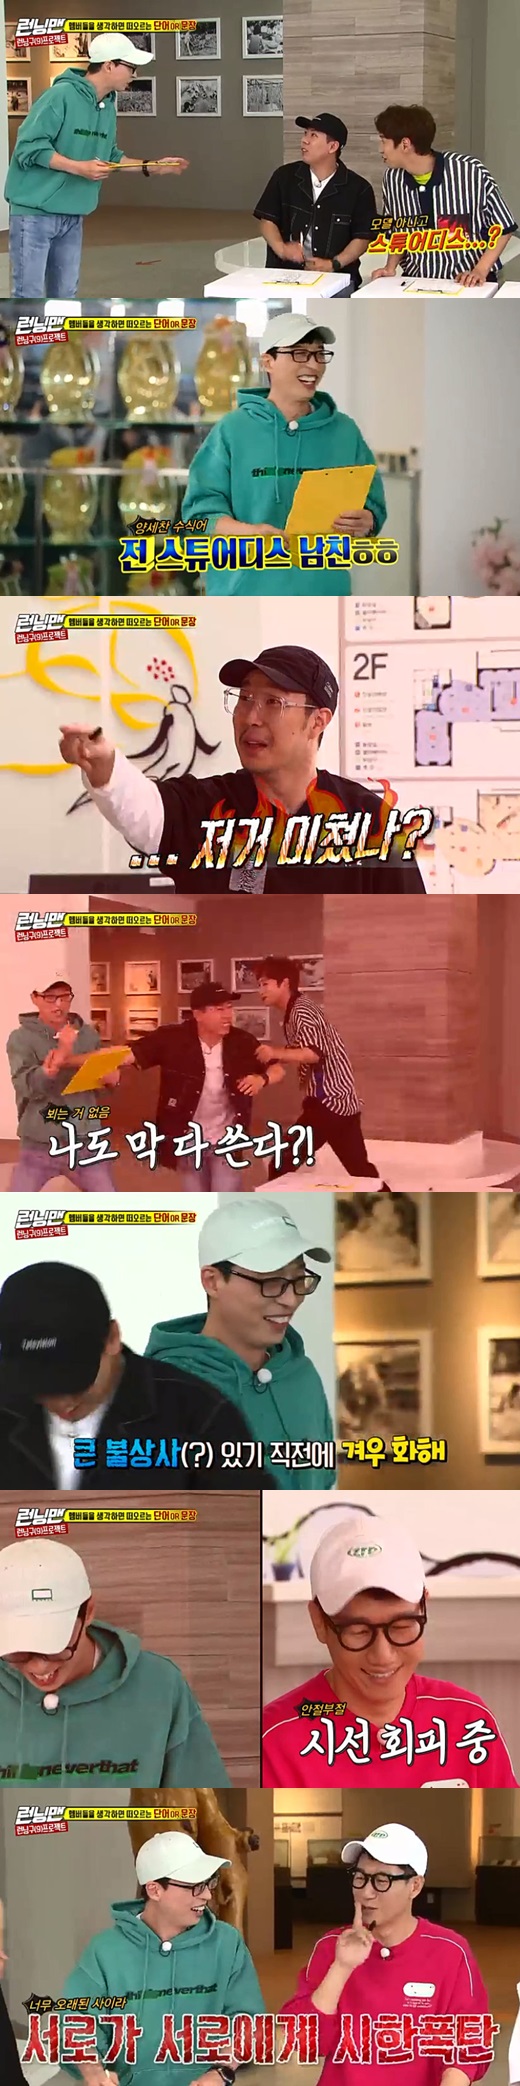 Running Man Yoo Jae-Suk is greatly embarrassed by Hahas sudden DisclosureOn SBS Running Man broadcasted on the afternoon of the 16th, I had time to write words or sentences that came to mind when I thought about the members.Ji Seok-jin said of Yoo Jae-Suk, I can lend up to 200 million when I am in a hurry, and Yoo Jae-Suk responded, I have to hold my brothers house on collateral.With various nicknames coming and going, Yoo Jae-Suk revealed the modifier ex-model boyfriend for Yang Se-chan, so the members corrected it as a stewardess, not a model.Yoo Jae-Suk said, I am a stewardess boyfriend, and Haha jumped up and said, Thats my brother.Yoo Jae-Suk was greatly surprised and shouted, Thats crazy, and laughed, I just write it! Write this! Write this.